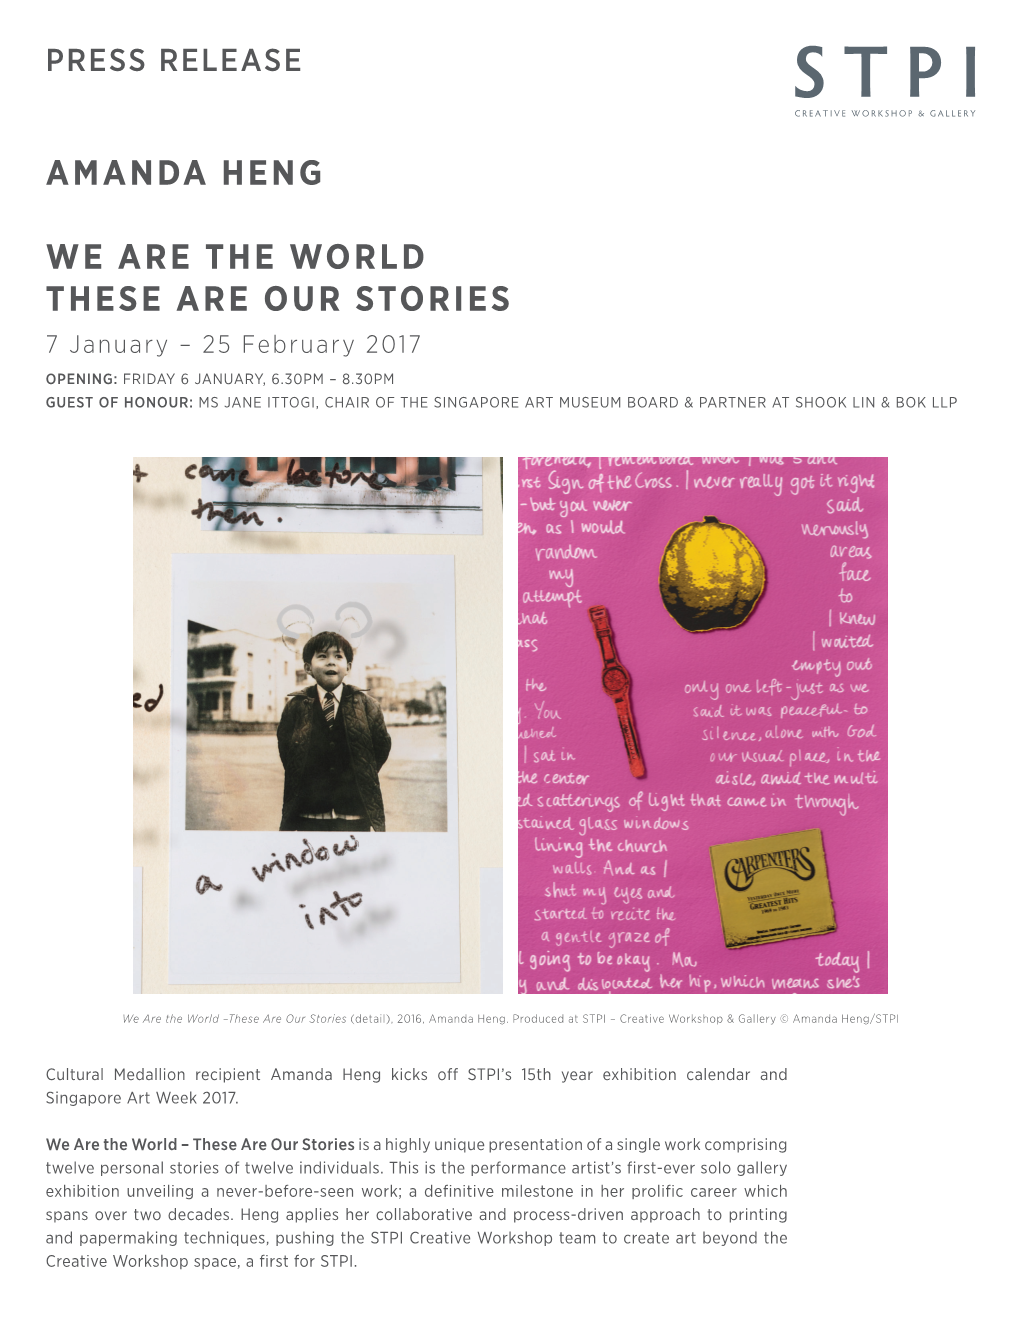 Amanda Heng We Are the World These Are Our Stories